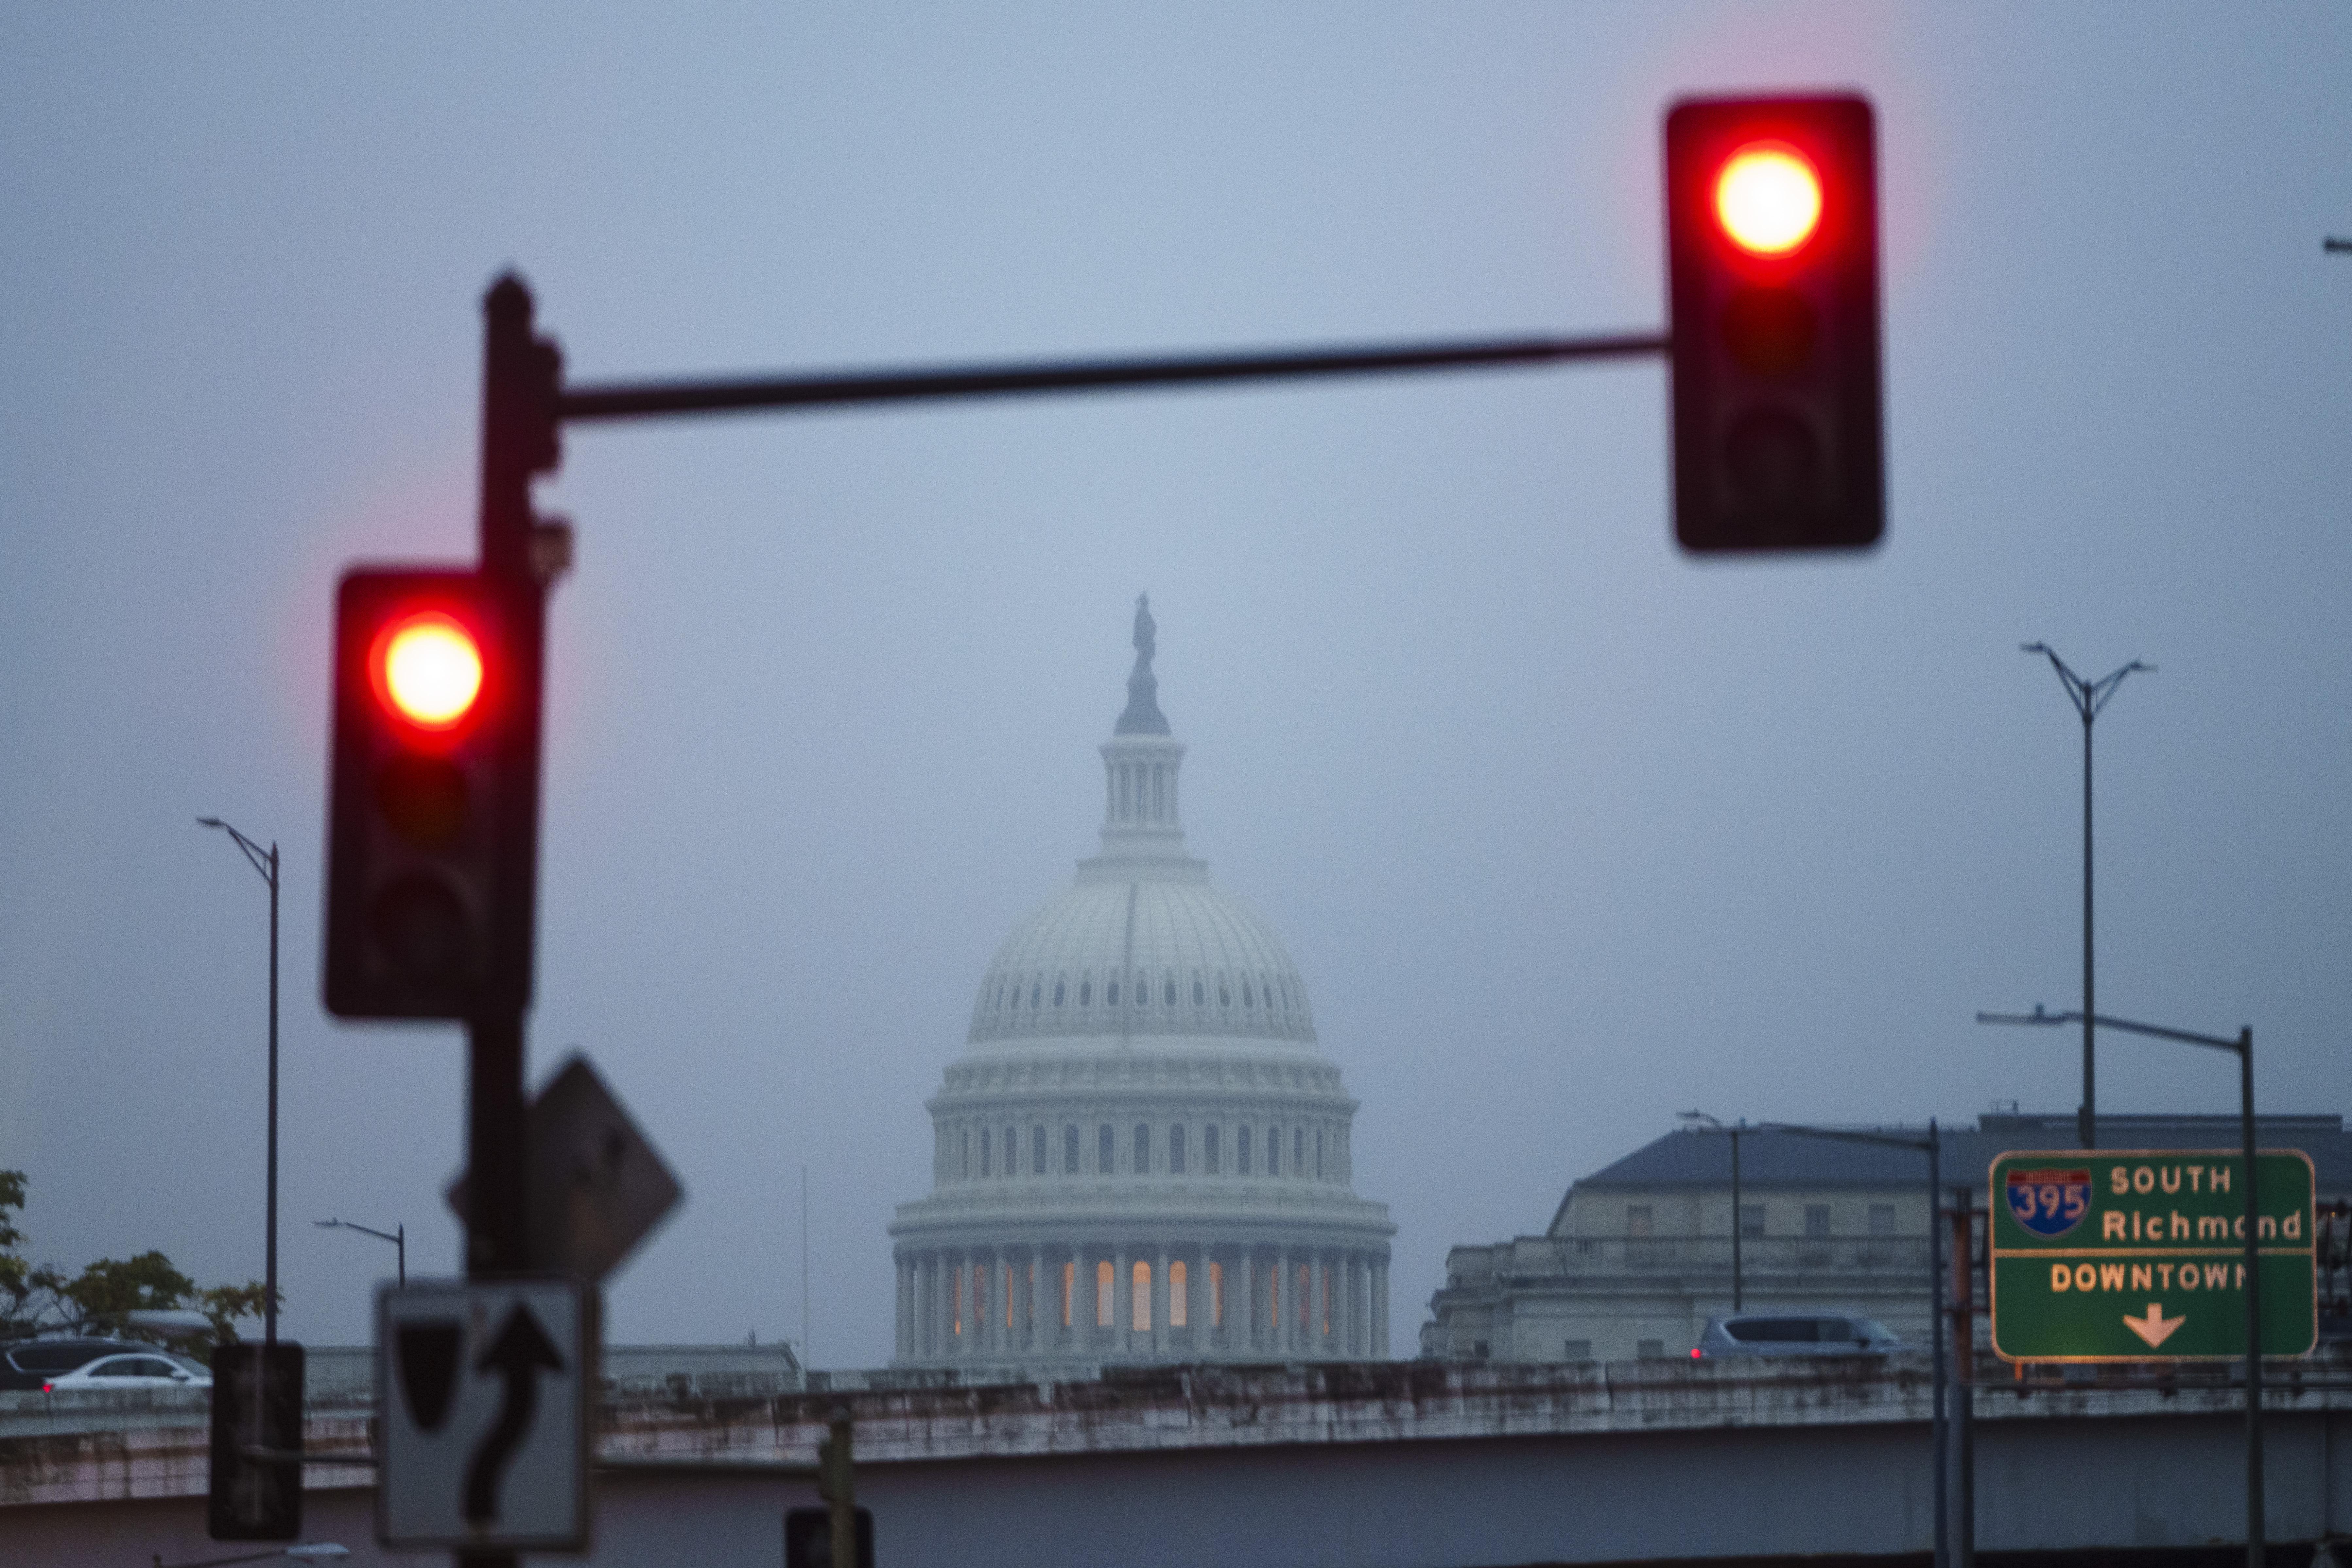 Capitol dome seen from a distance on a foggy morning, with red stoplights in the foreground